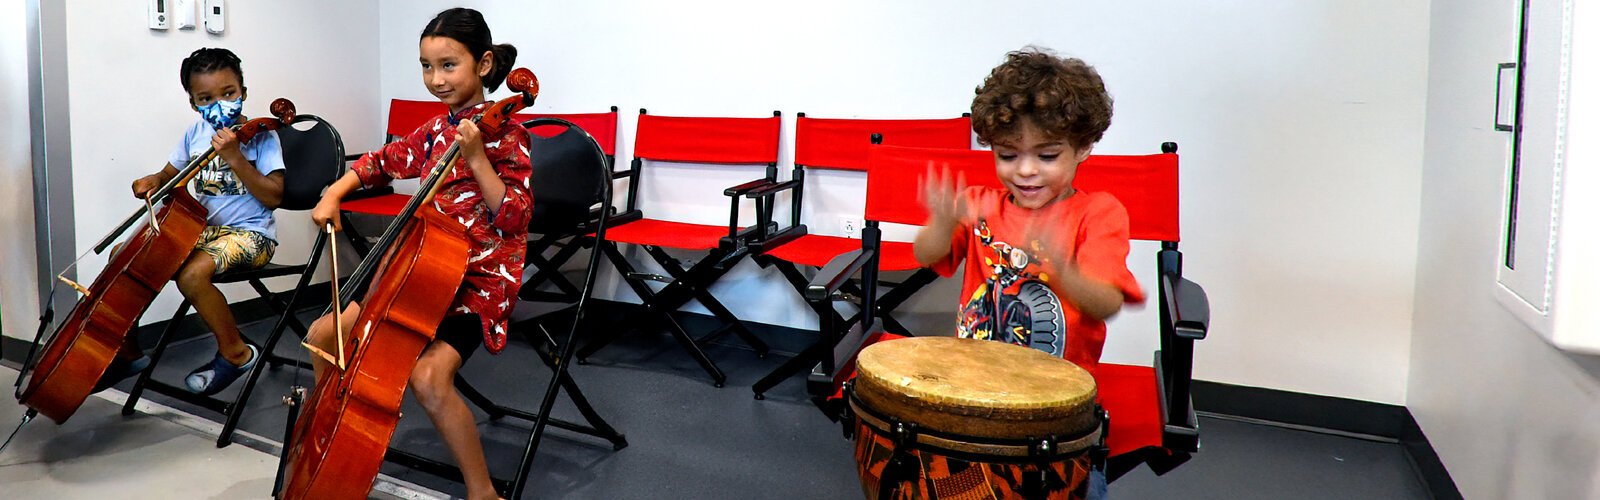 Xander, age 6, and Sofia, 6, try out cellos while Nicholas, 5, has fun at the drum at The Florida Orchestra’s “Petting Zoo," which gives kids the experience of playing a musical instrument.